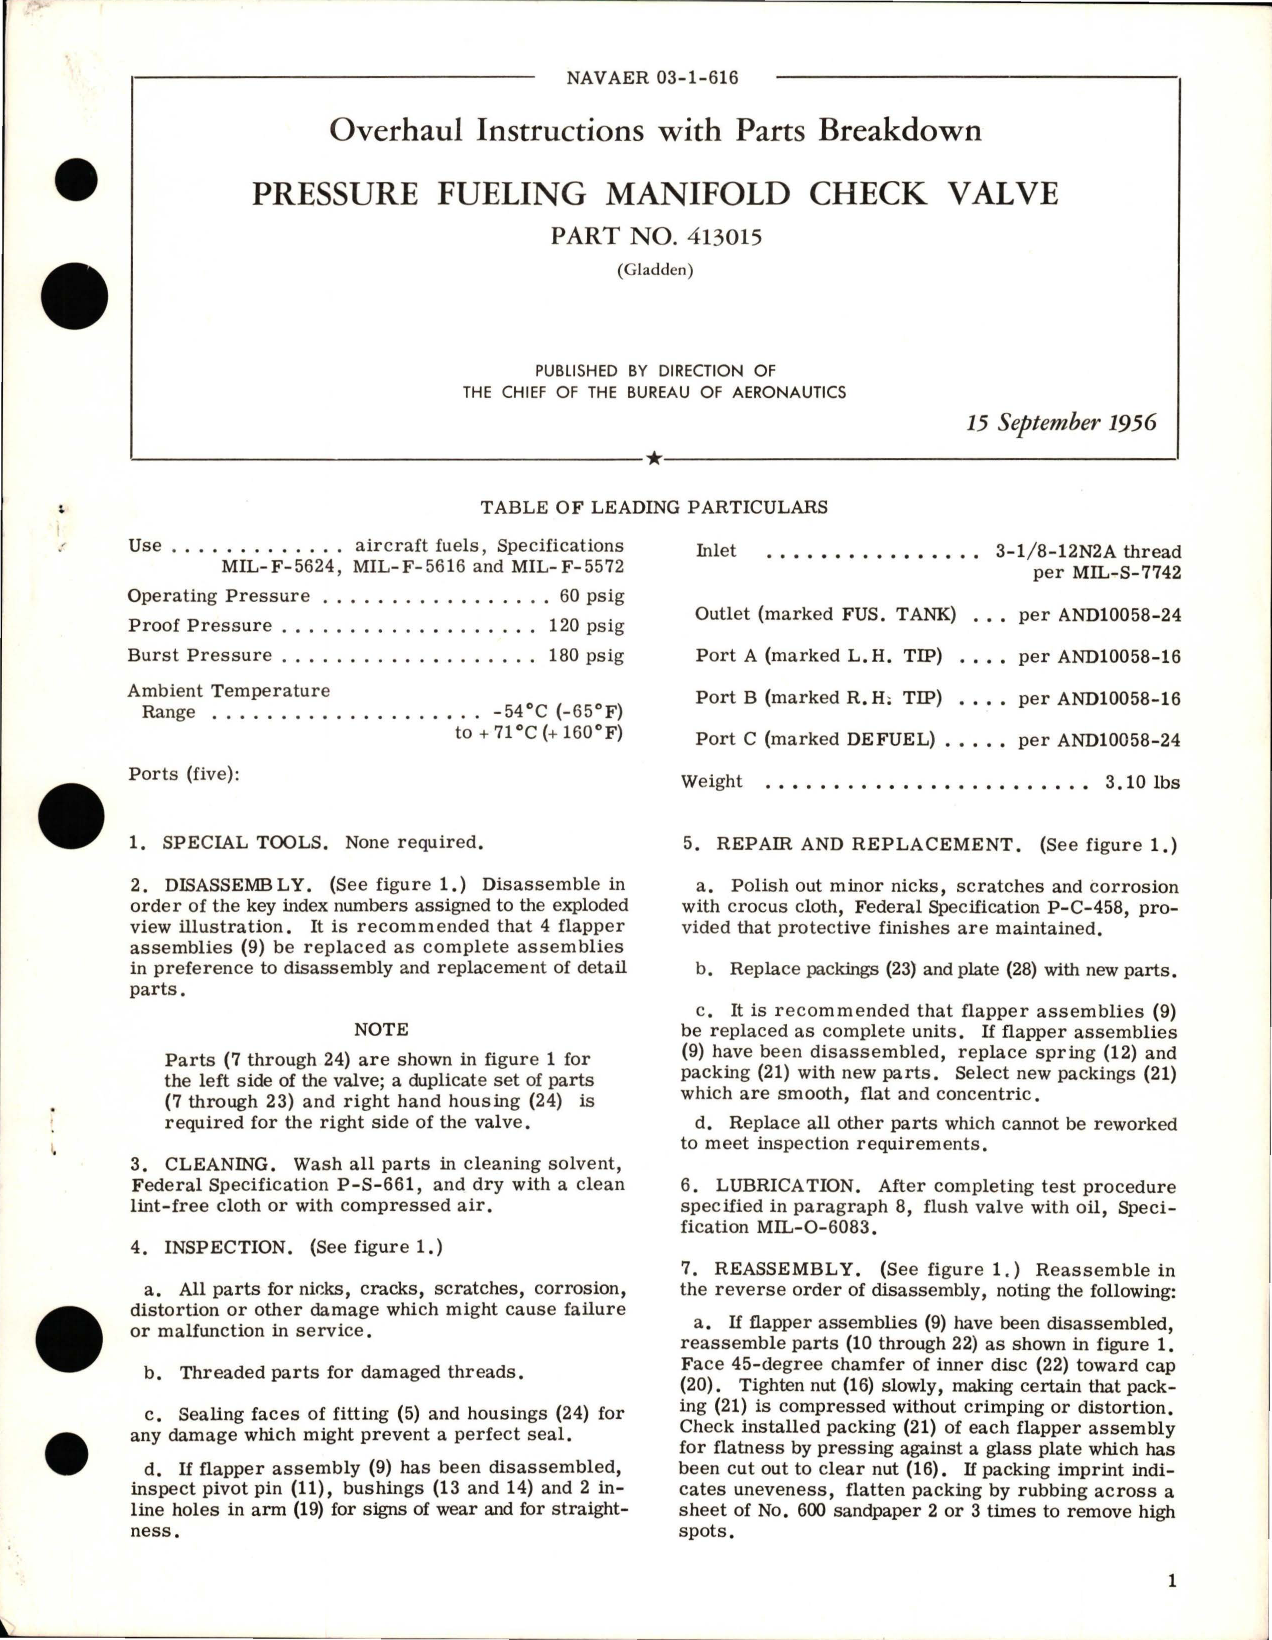 Sample page 1 from AirCorps Library document: Overhaul Instructions with Parts Breakdown for Pressure Fueling Manifold Check Valve - Part 413015